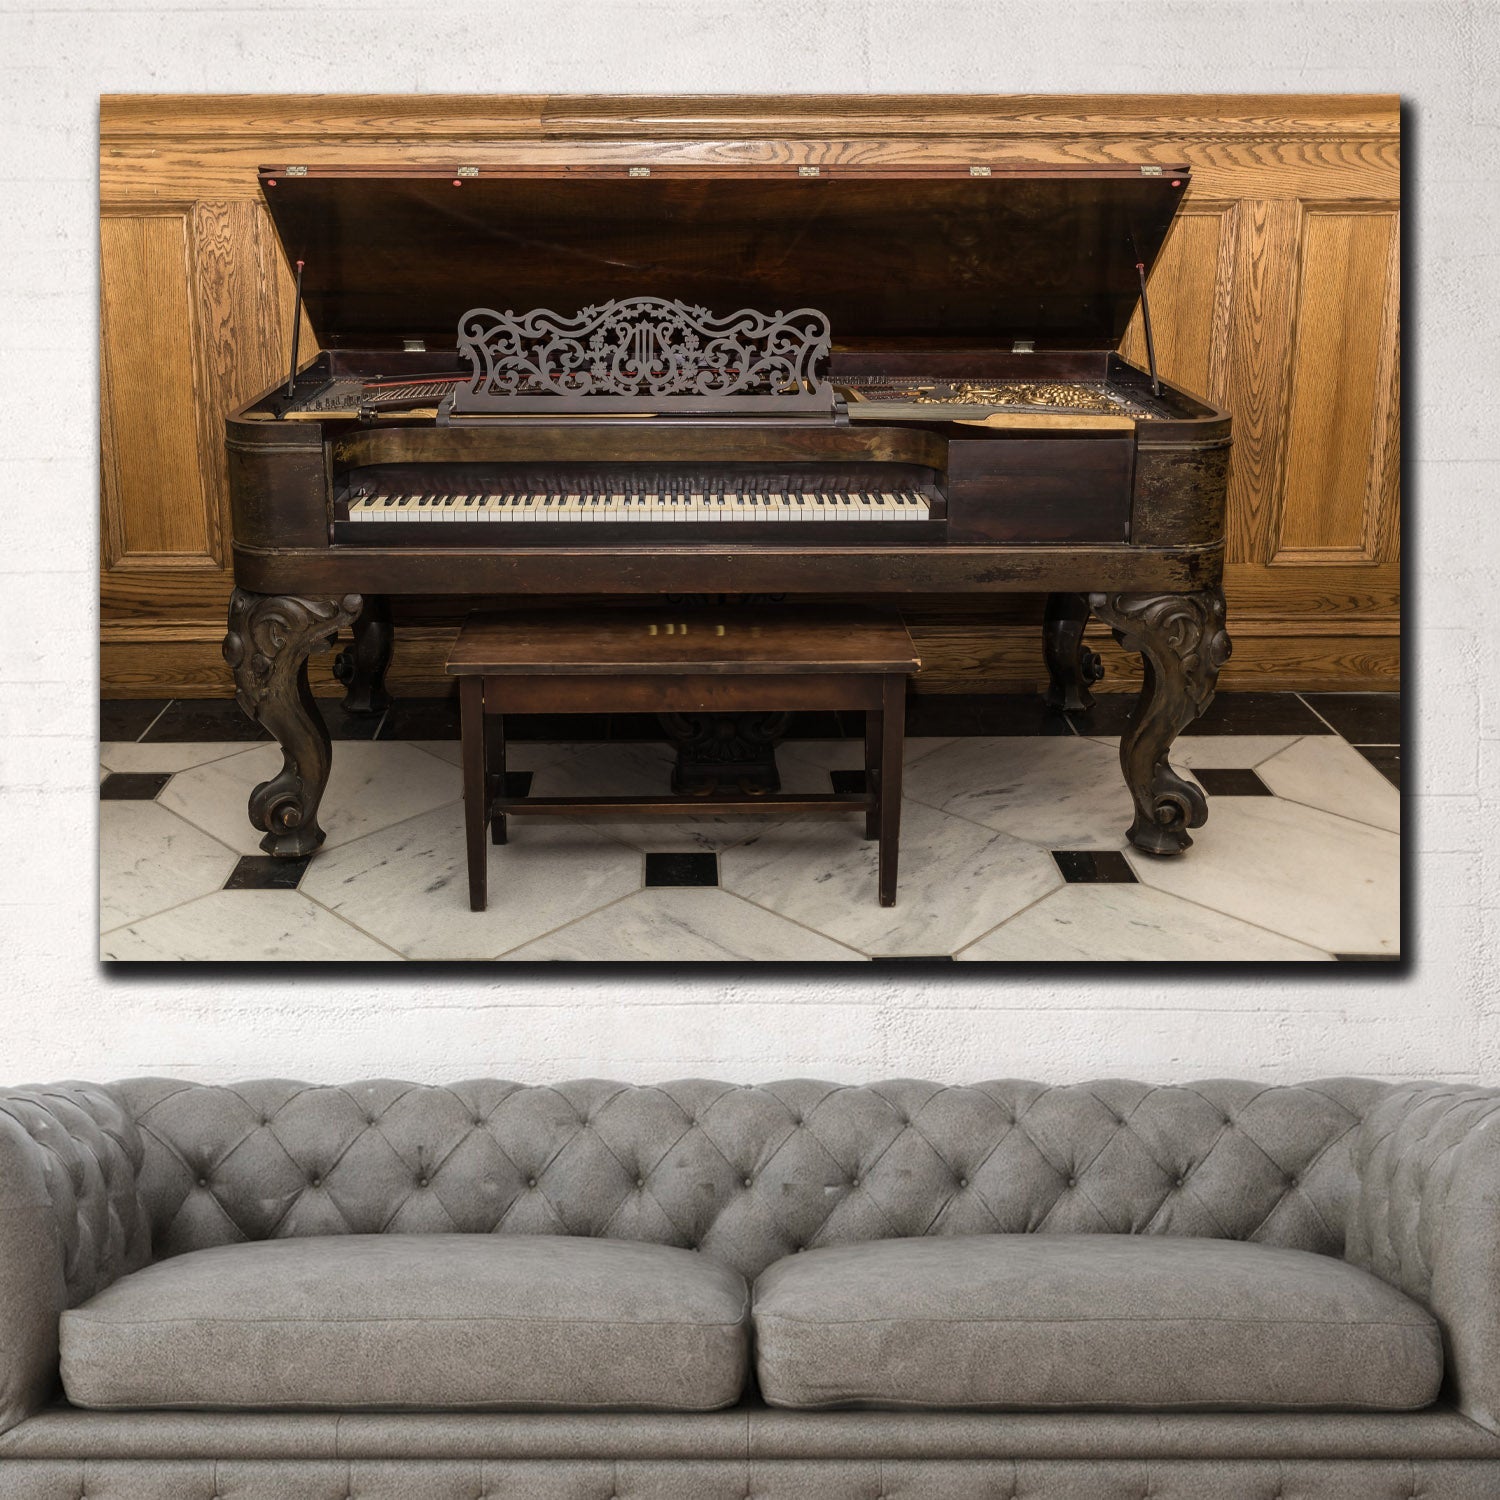 https://cdn.shopify.com/s/files/1/0387/9986/8044/products/AntiquePianoWithStoolCanvasArtprintStretched-1.jpg